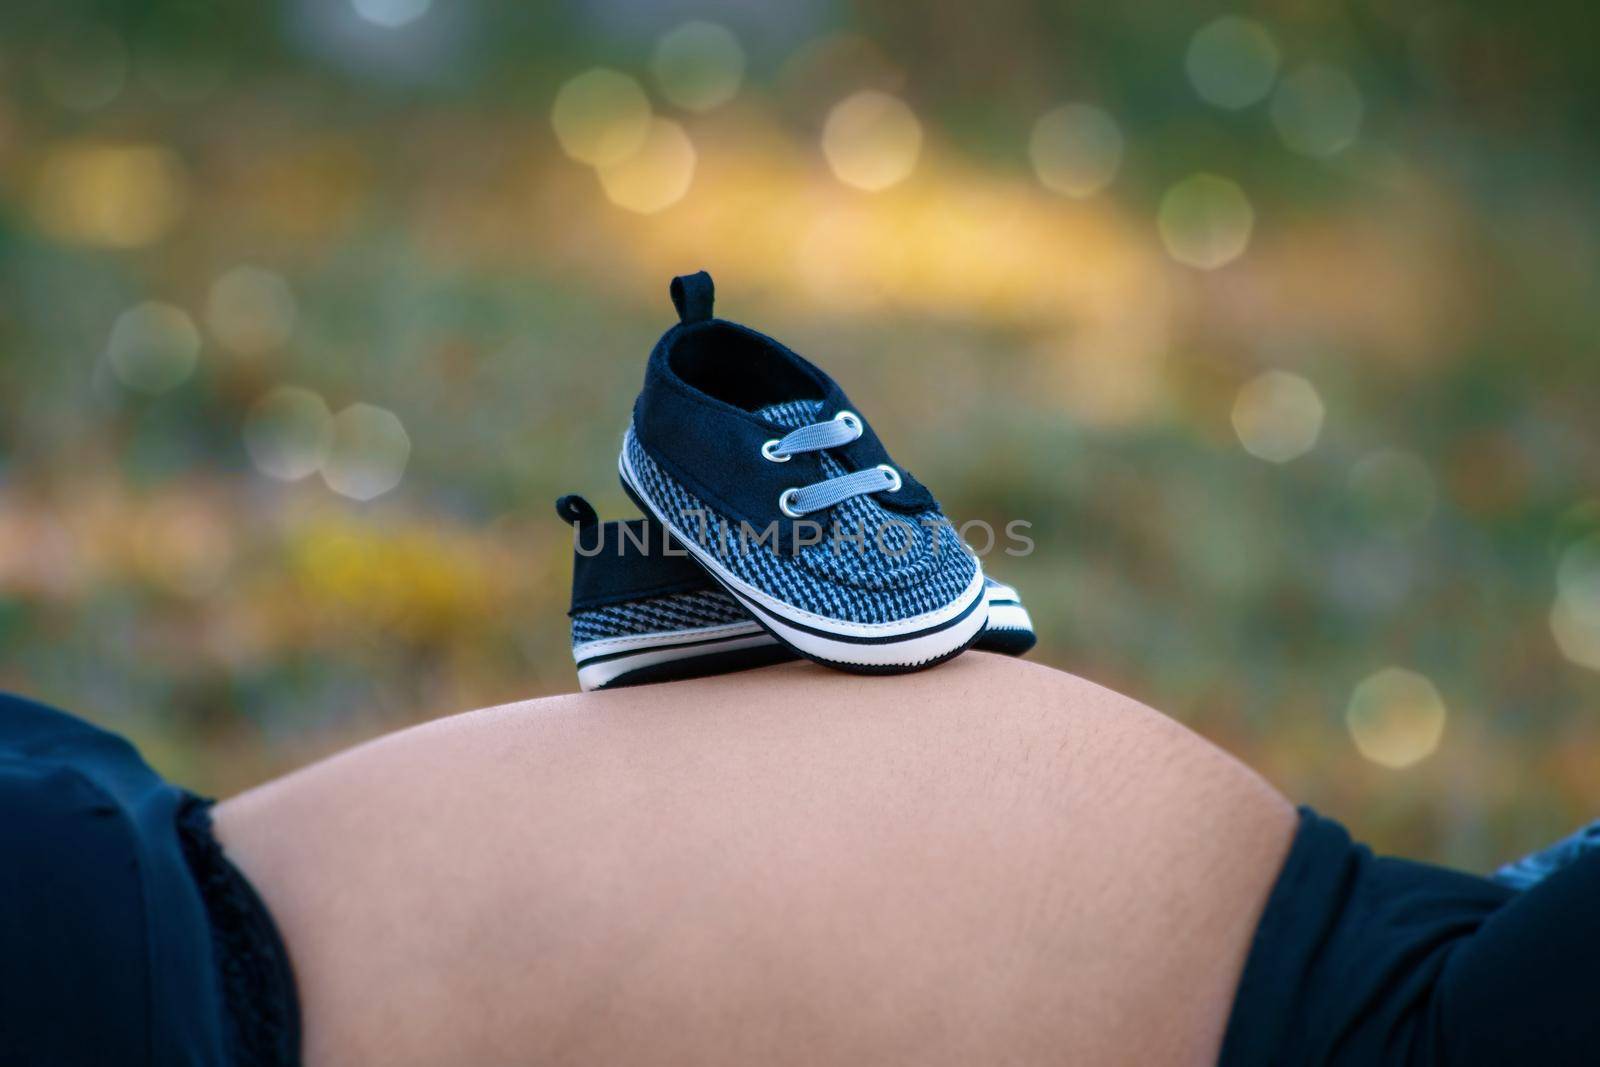 Photos of a pair of tiny shoes on a pregnant woman's tummy